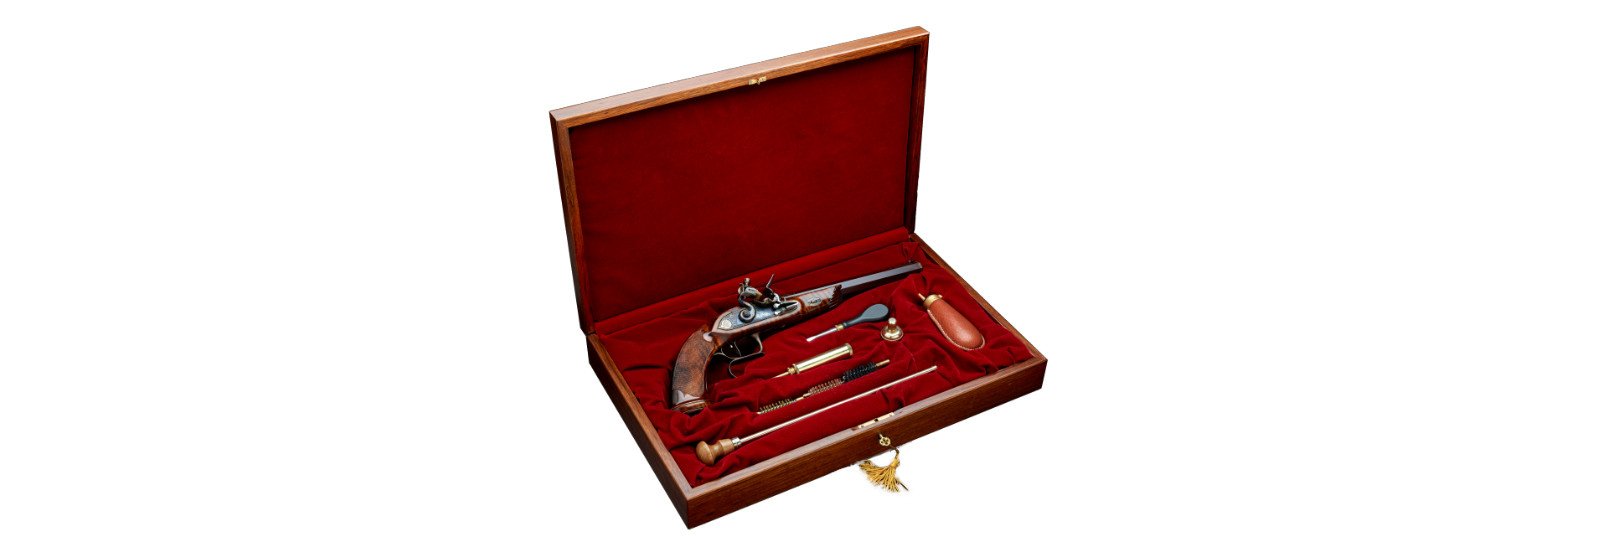 Le Page DELUXE flintlock model with case